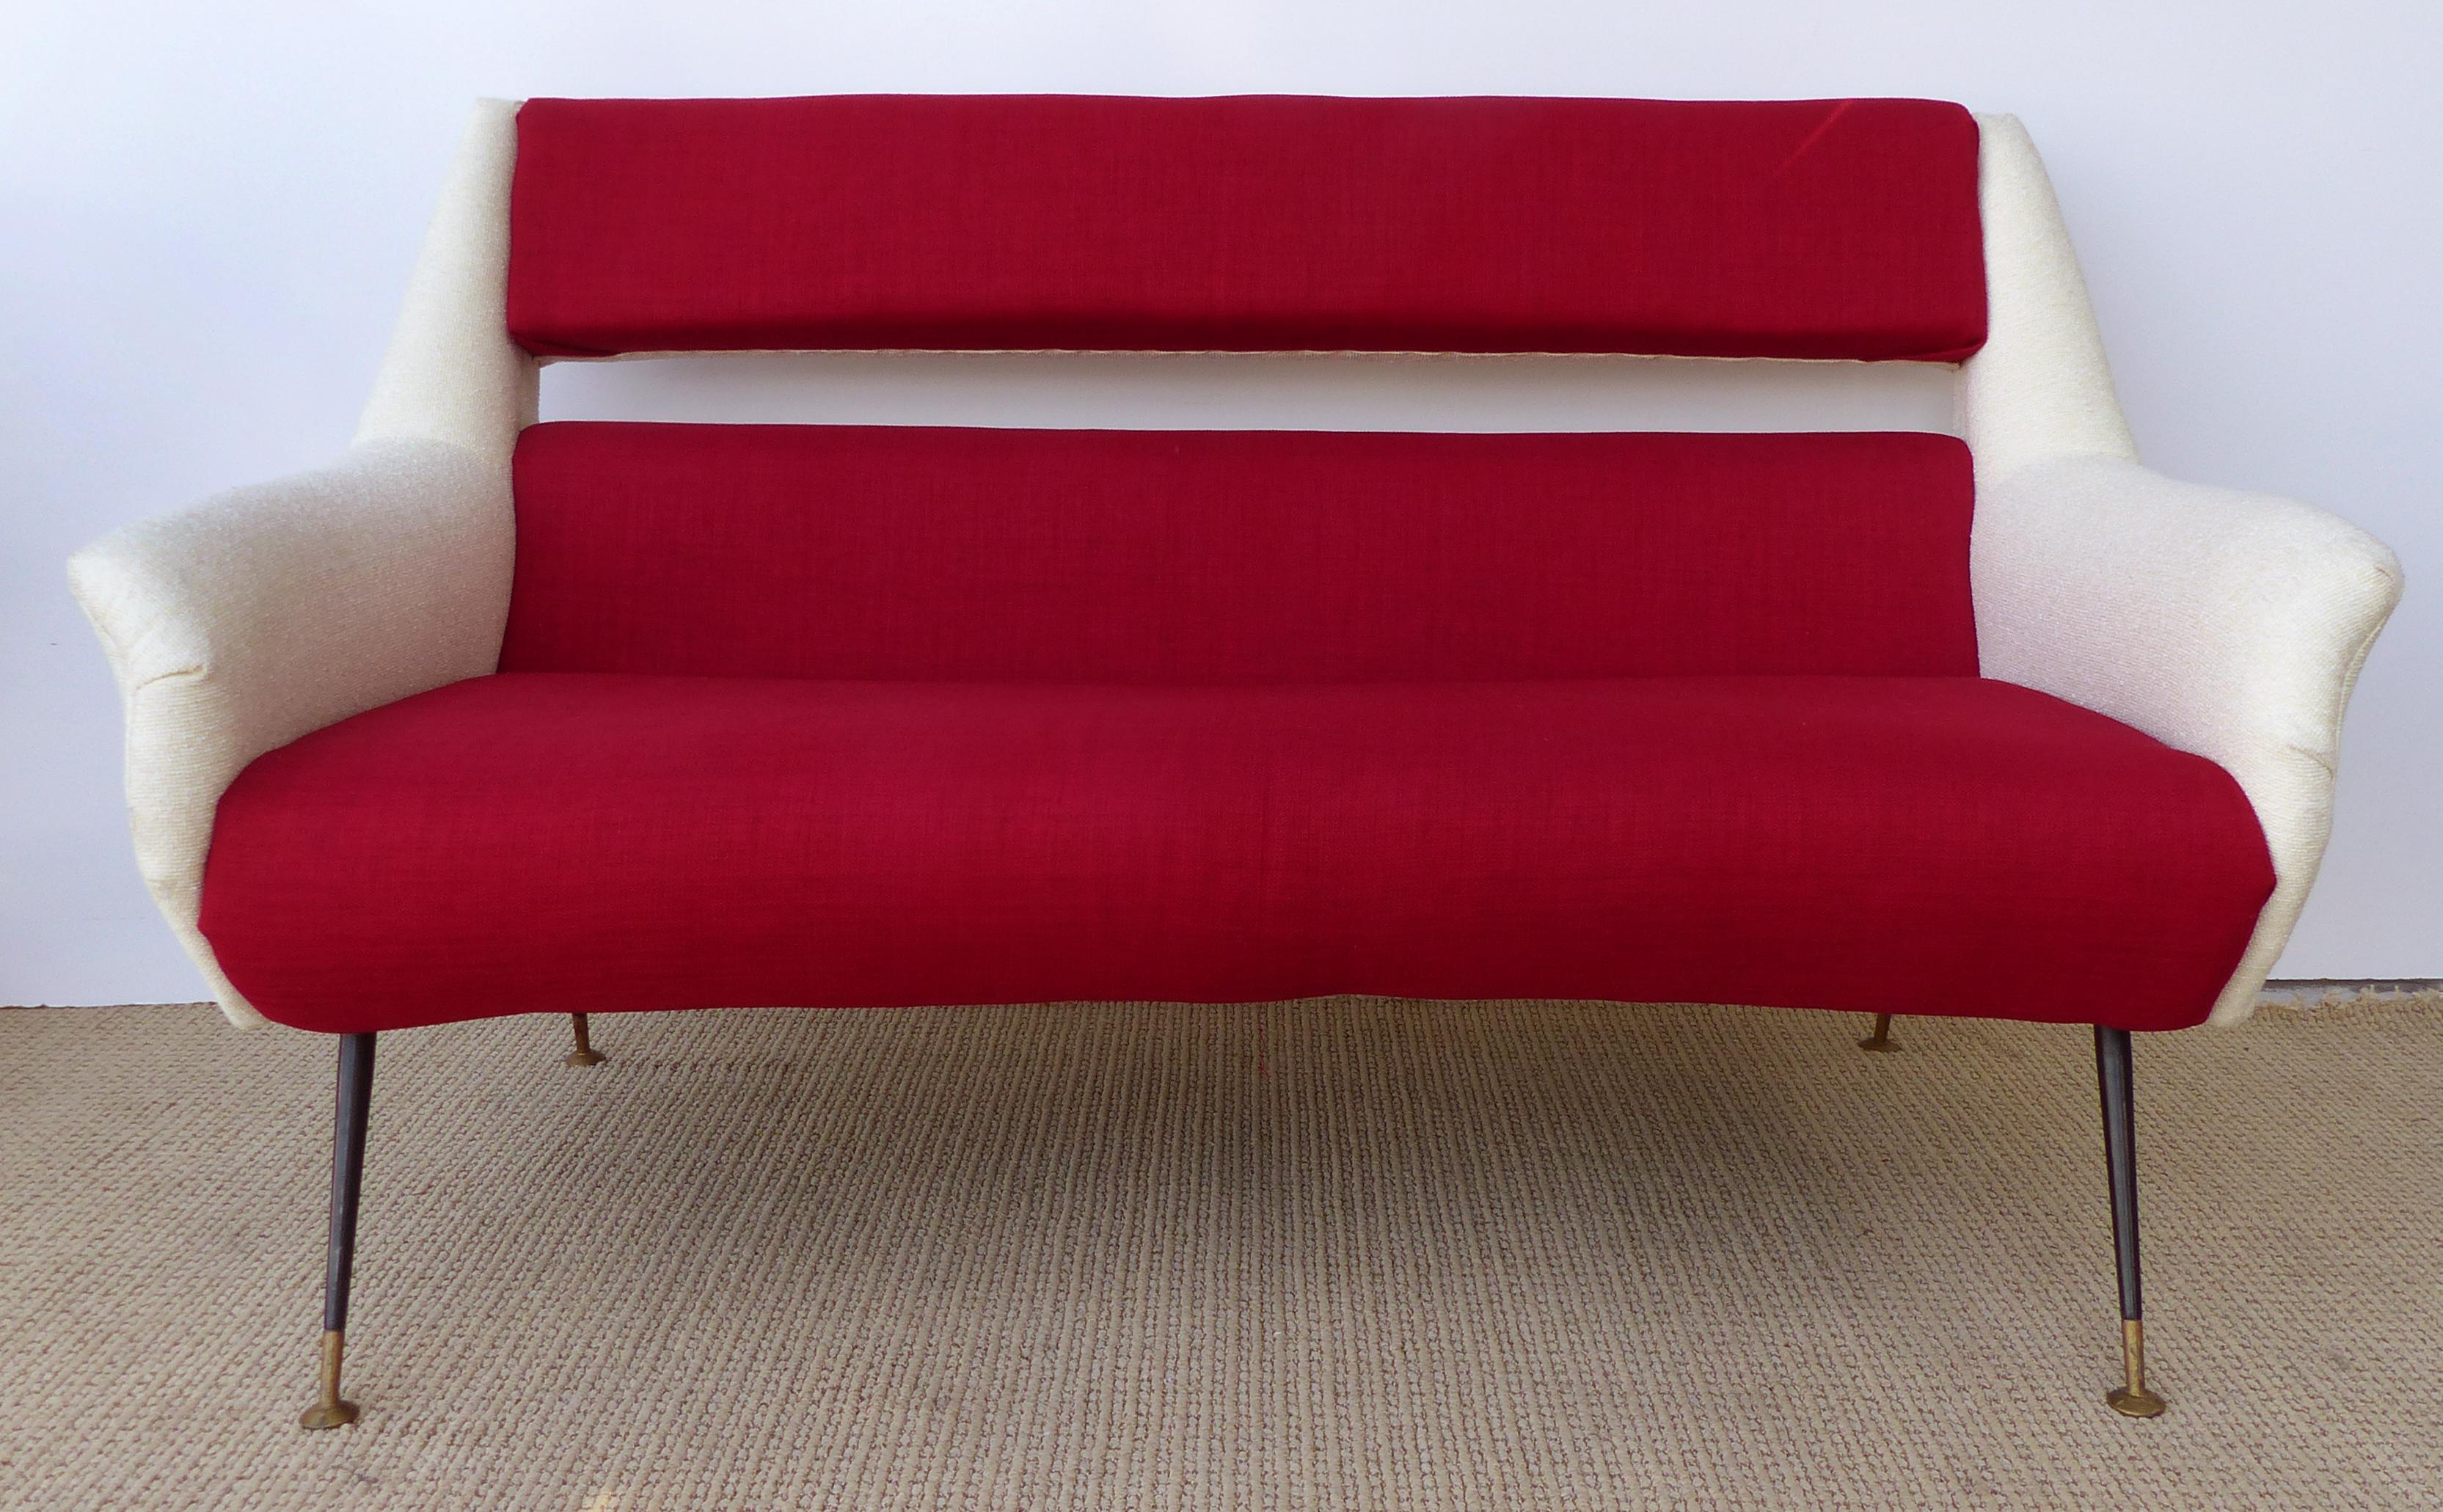 1960s Gigi Radice Midcentury Italian Settee

This circa 1960 midcentury Italian settee by Gigi Radice newly upholstered with a two-tones of wool. The settee is supported by splayed enameled steel legs with brass capped feet. Arm, 20.5